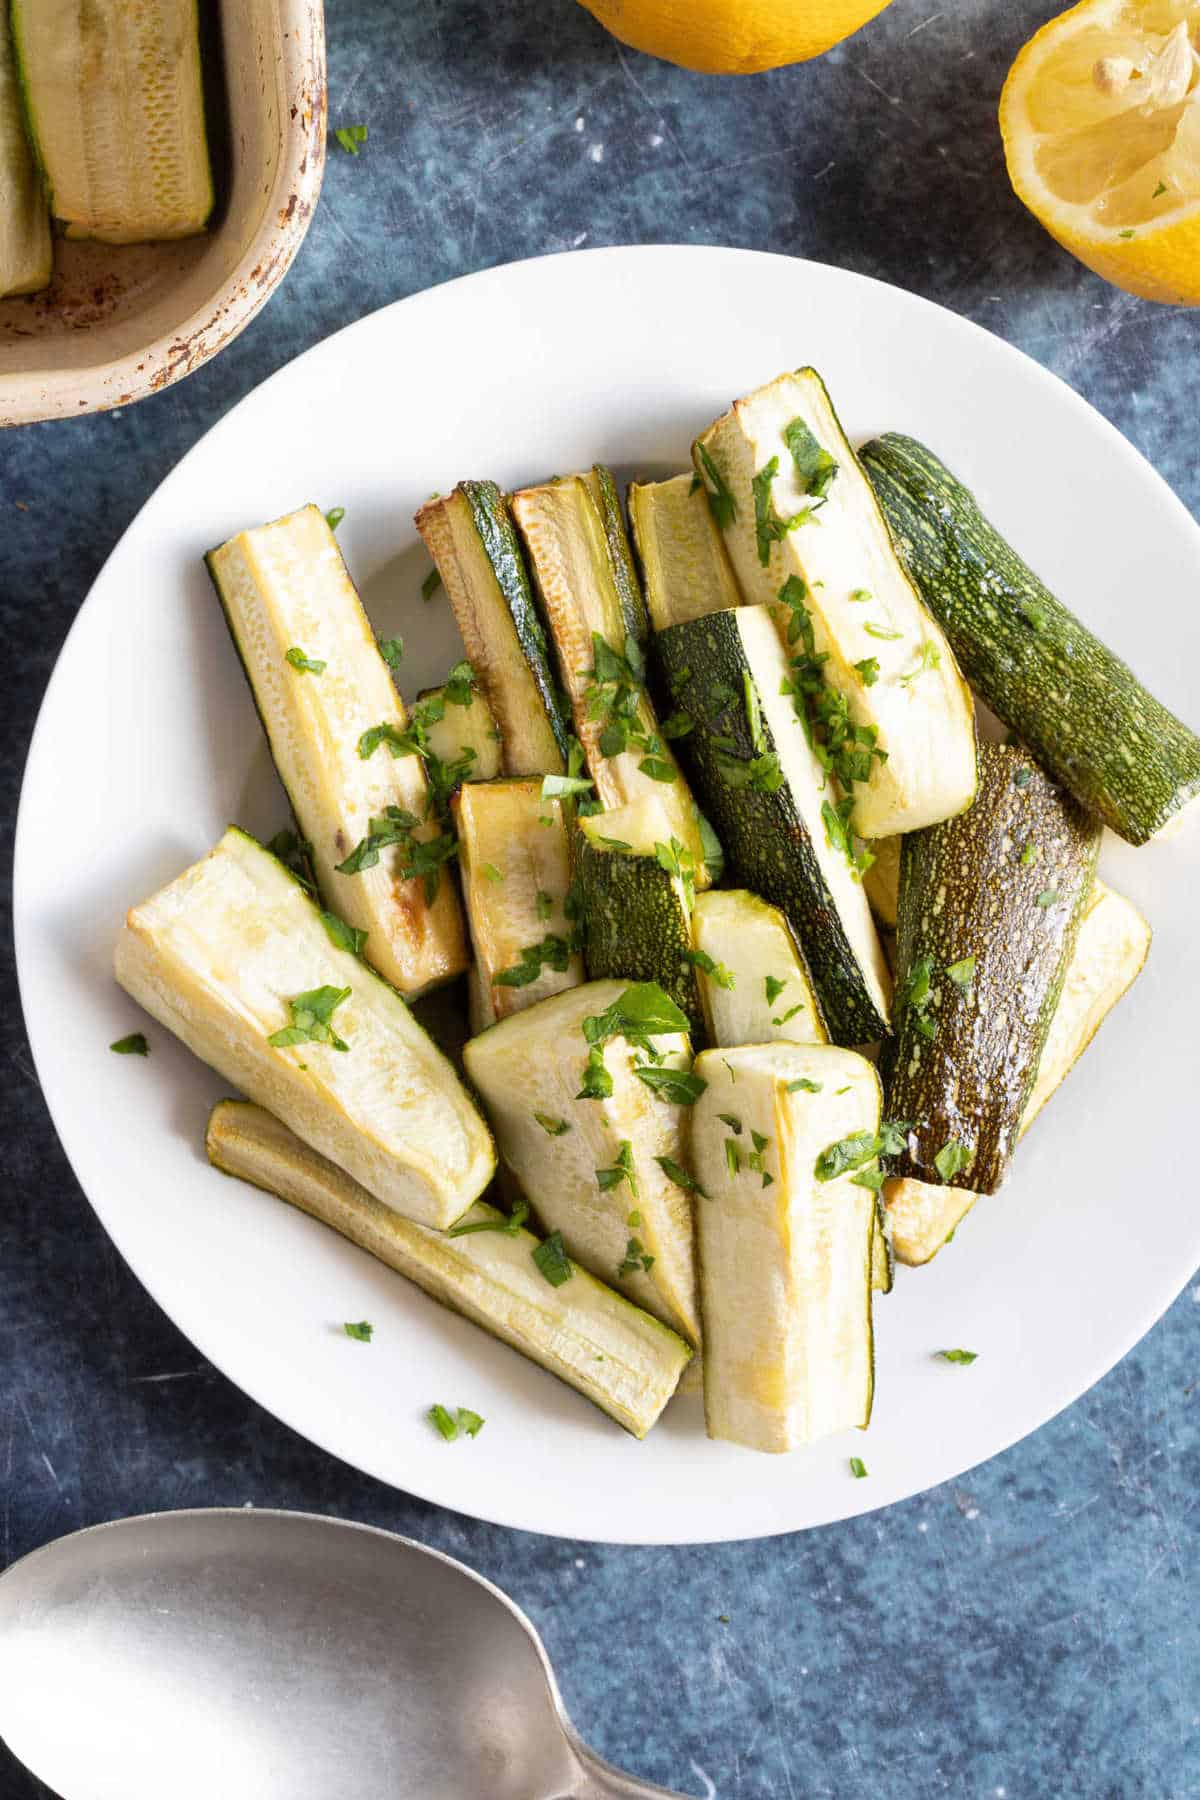 Roast courgettes with lemon and garlic.